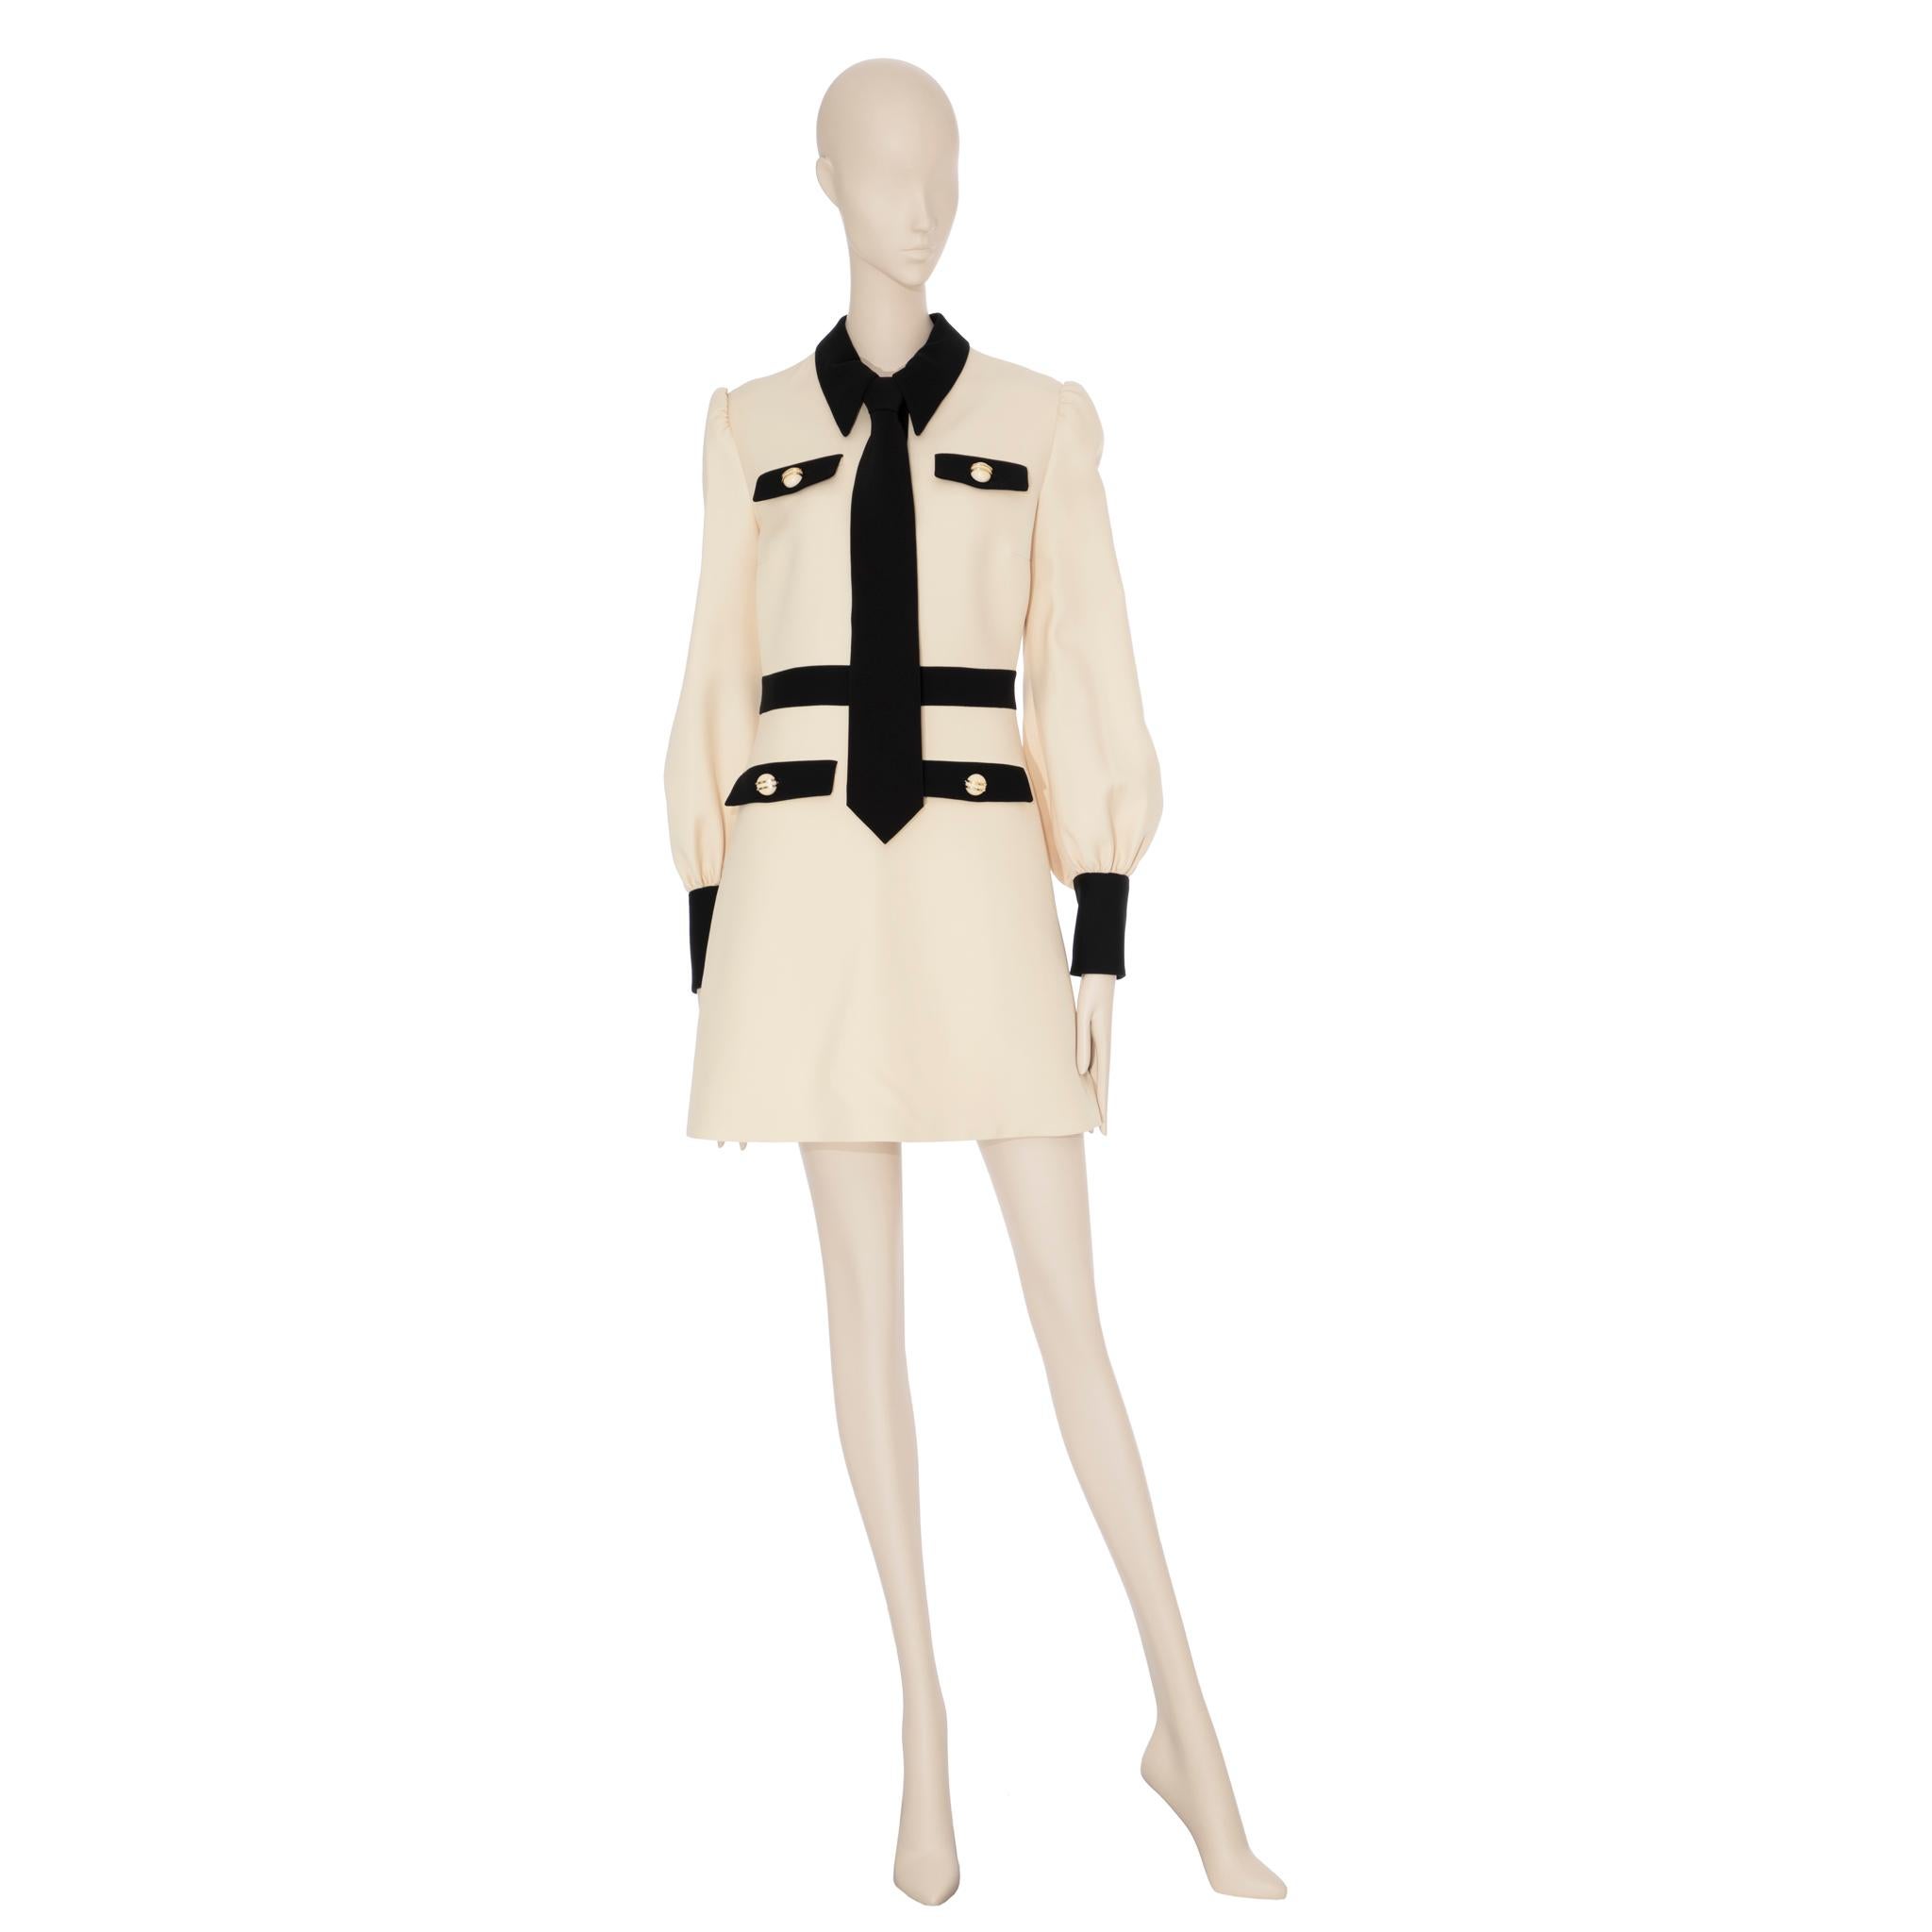 Brand:

Gucci

Product:

Long Sleeve Dress With Tie

Size:

40 It

Colour:

Ivory & Black

Material

Wool 51% & Silk 49%

Condition:

Pristine; New Or Never Worn

Details

- Long Sleeve Wool And Silk-Blend Crepe Short Dress

- Three Ornamental